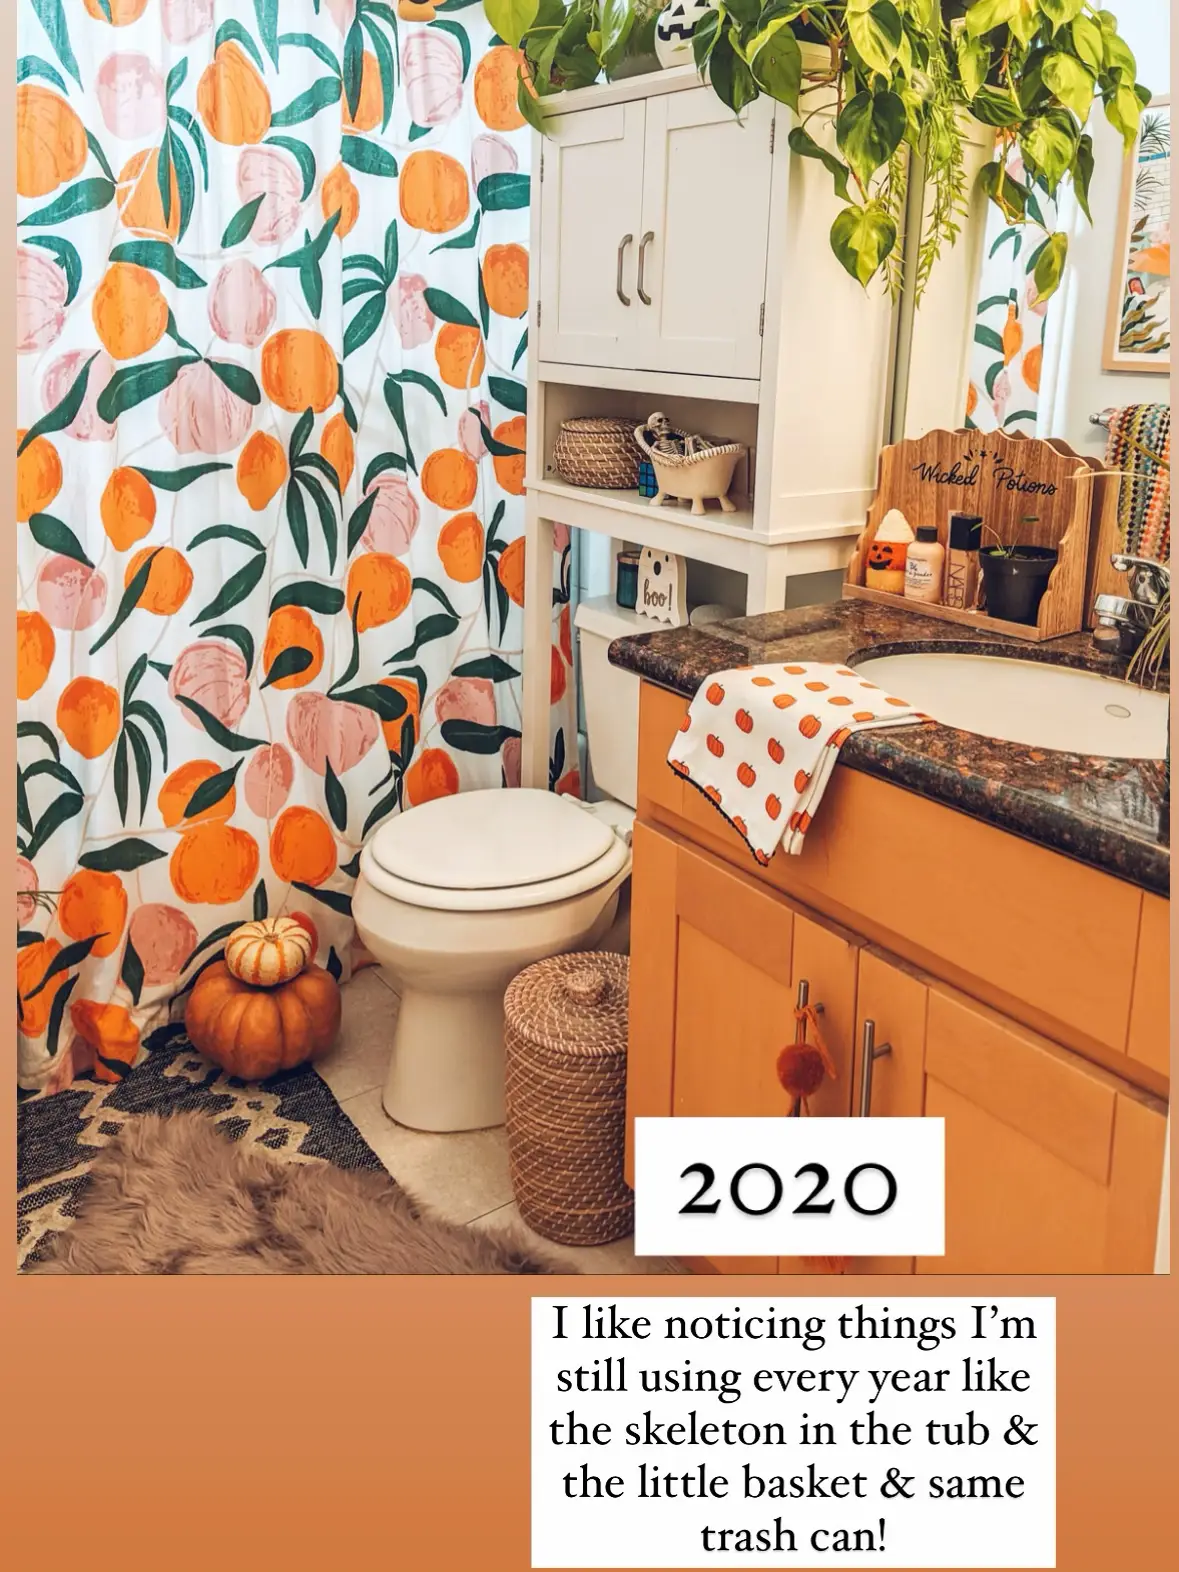  A kitchen with a sink, toilet, and a potted plant.